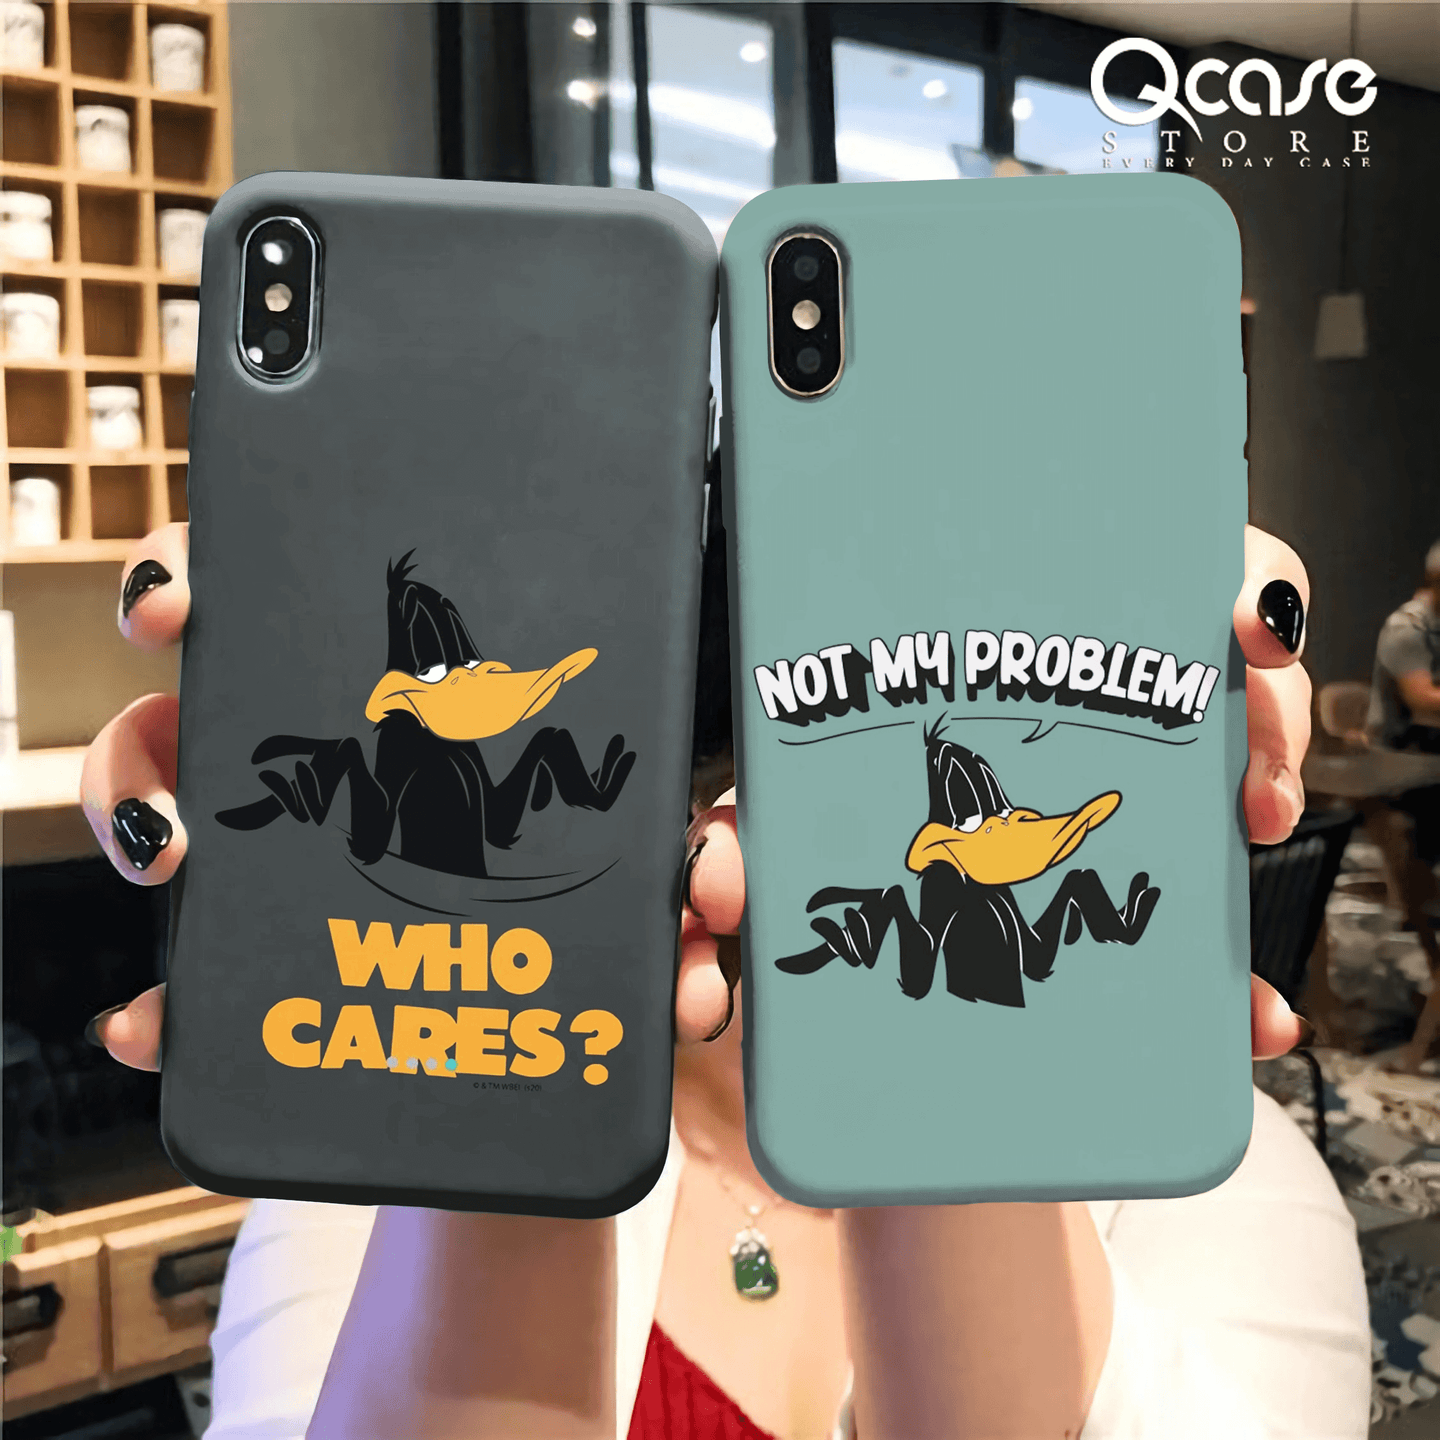 WHO CARES? & NOT MY PROBLEM! black duck Phone Covers